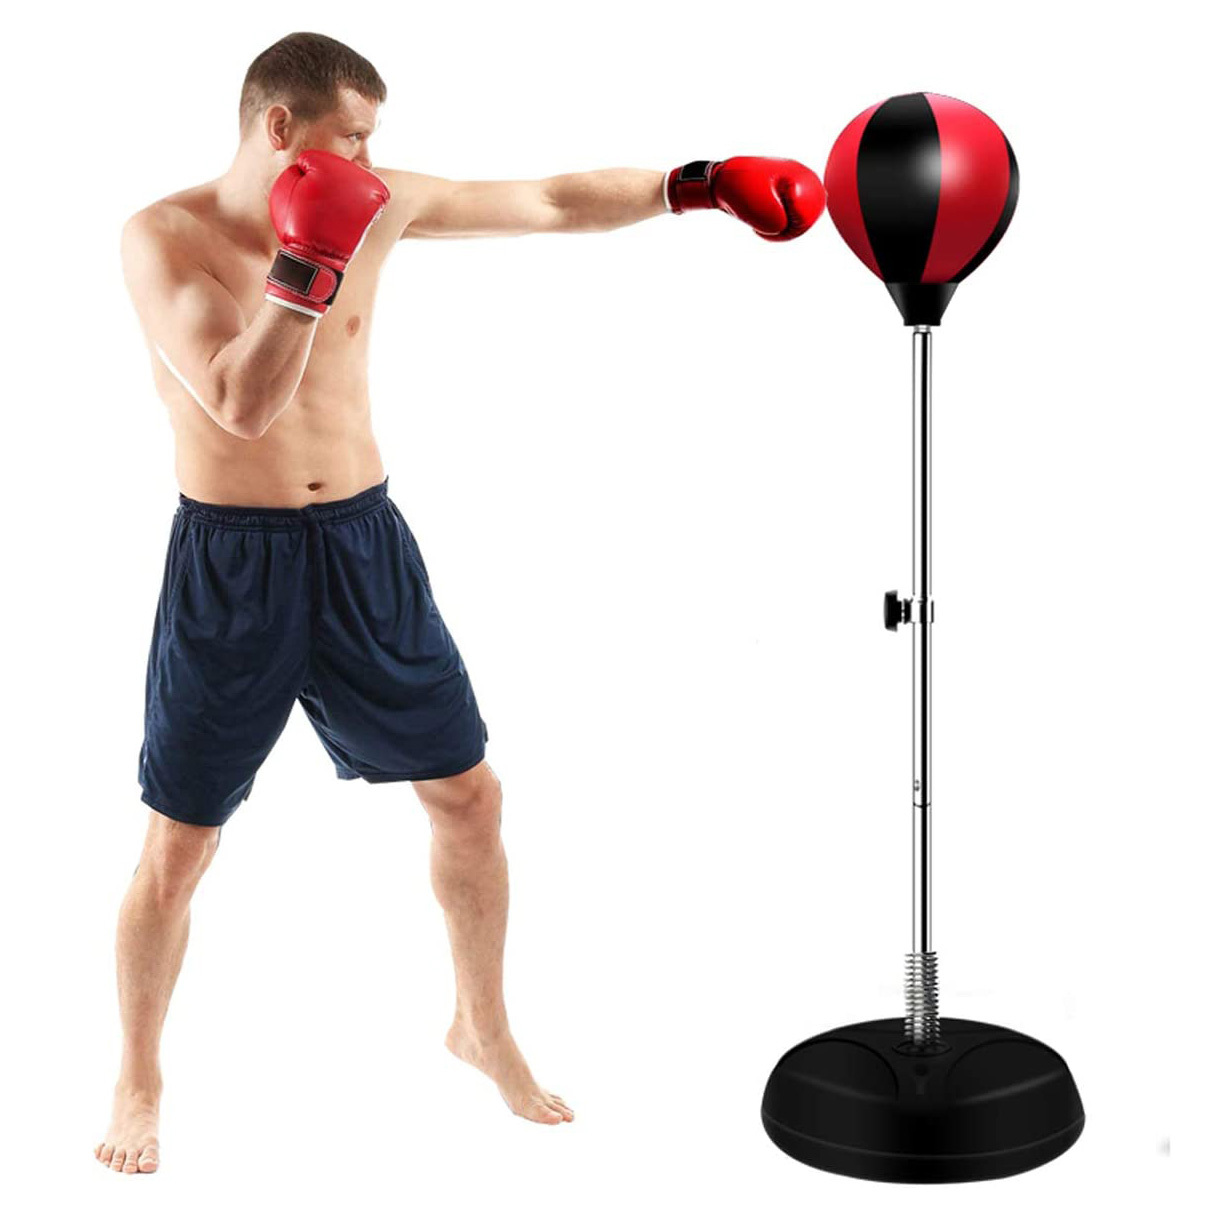 Speed Ball Stand Punching Boxing Bag Glove Set | Paul Smith